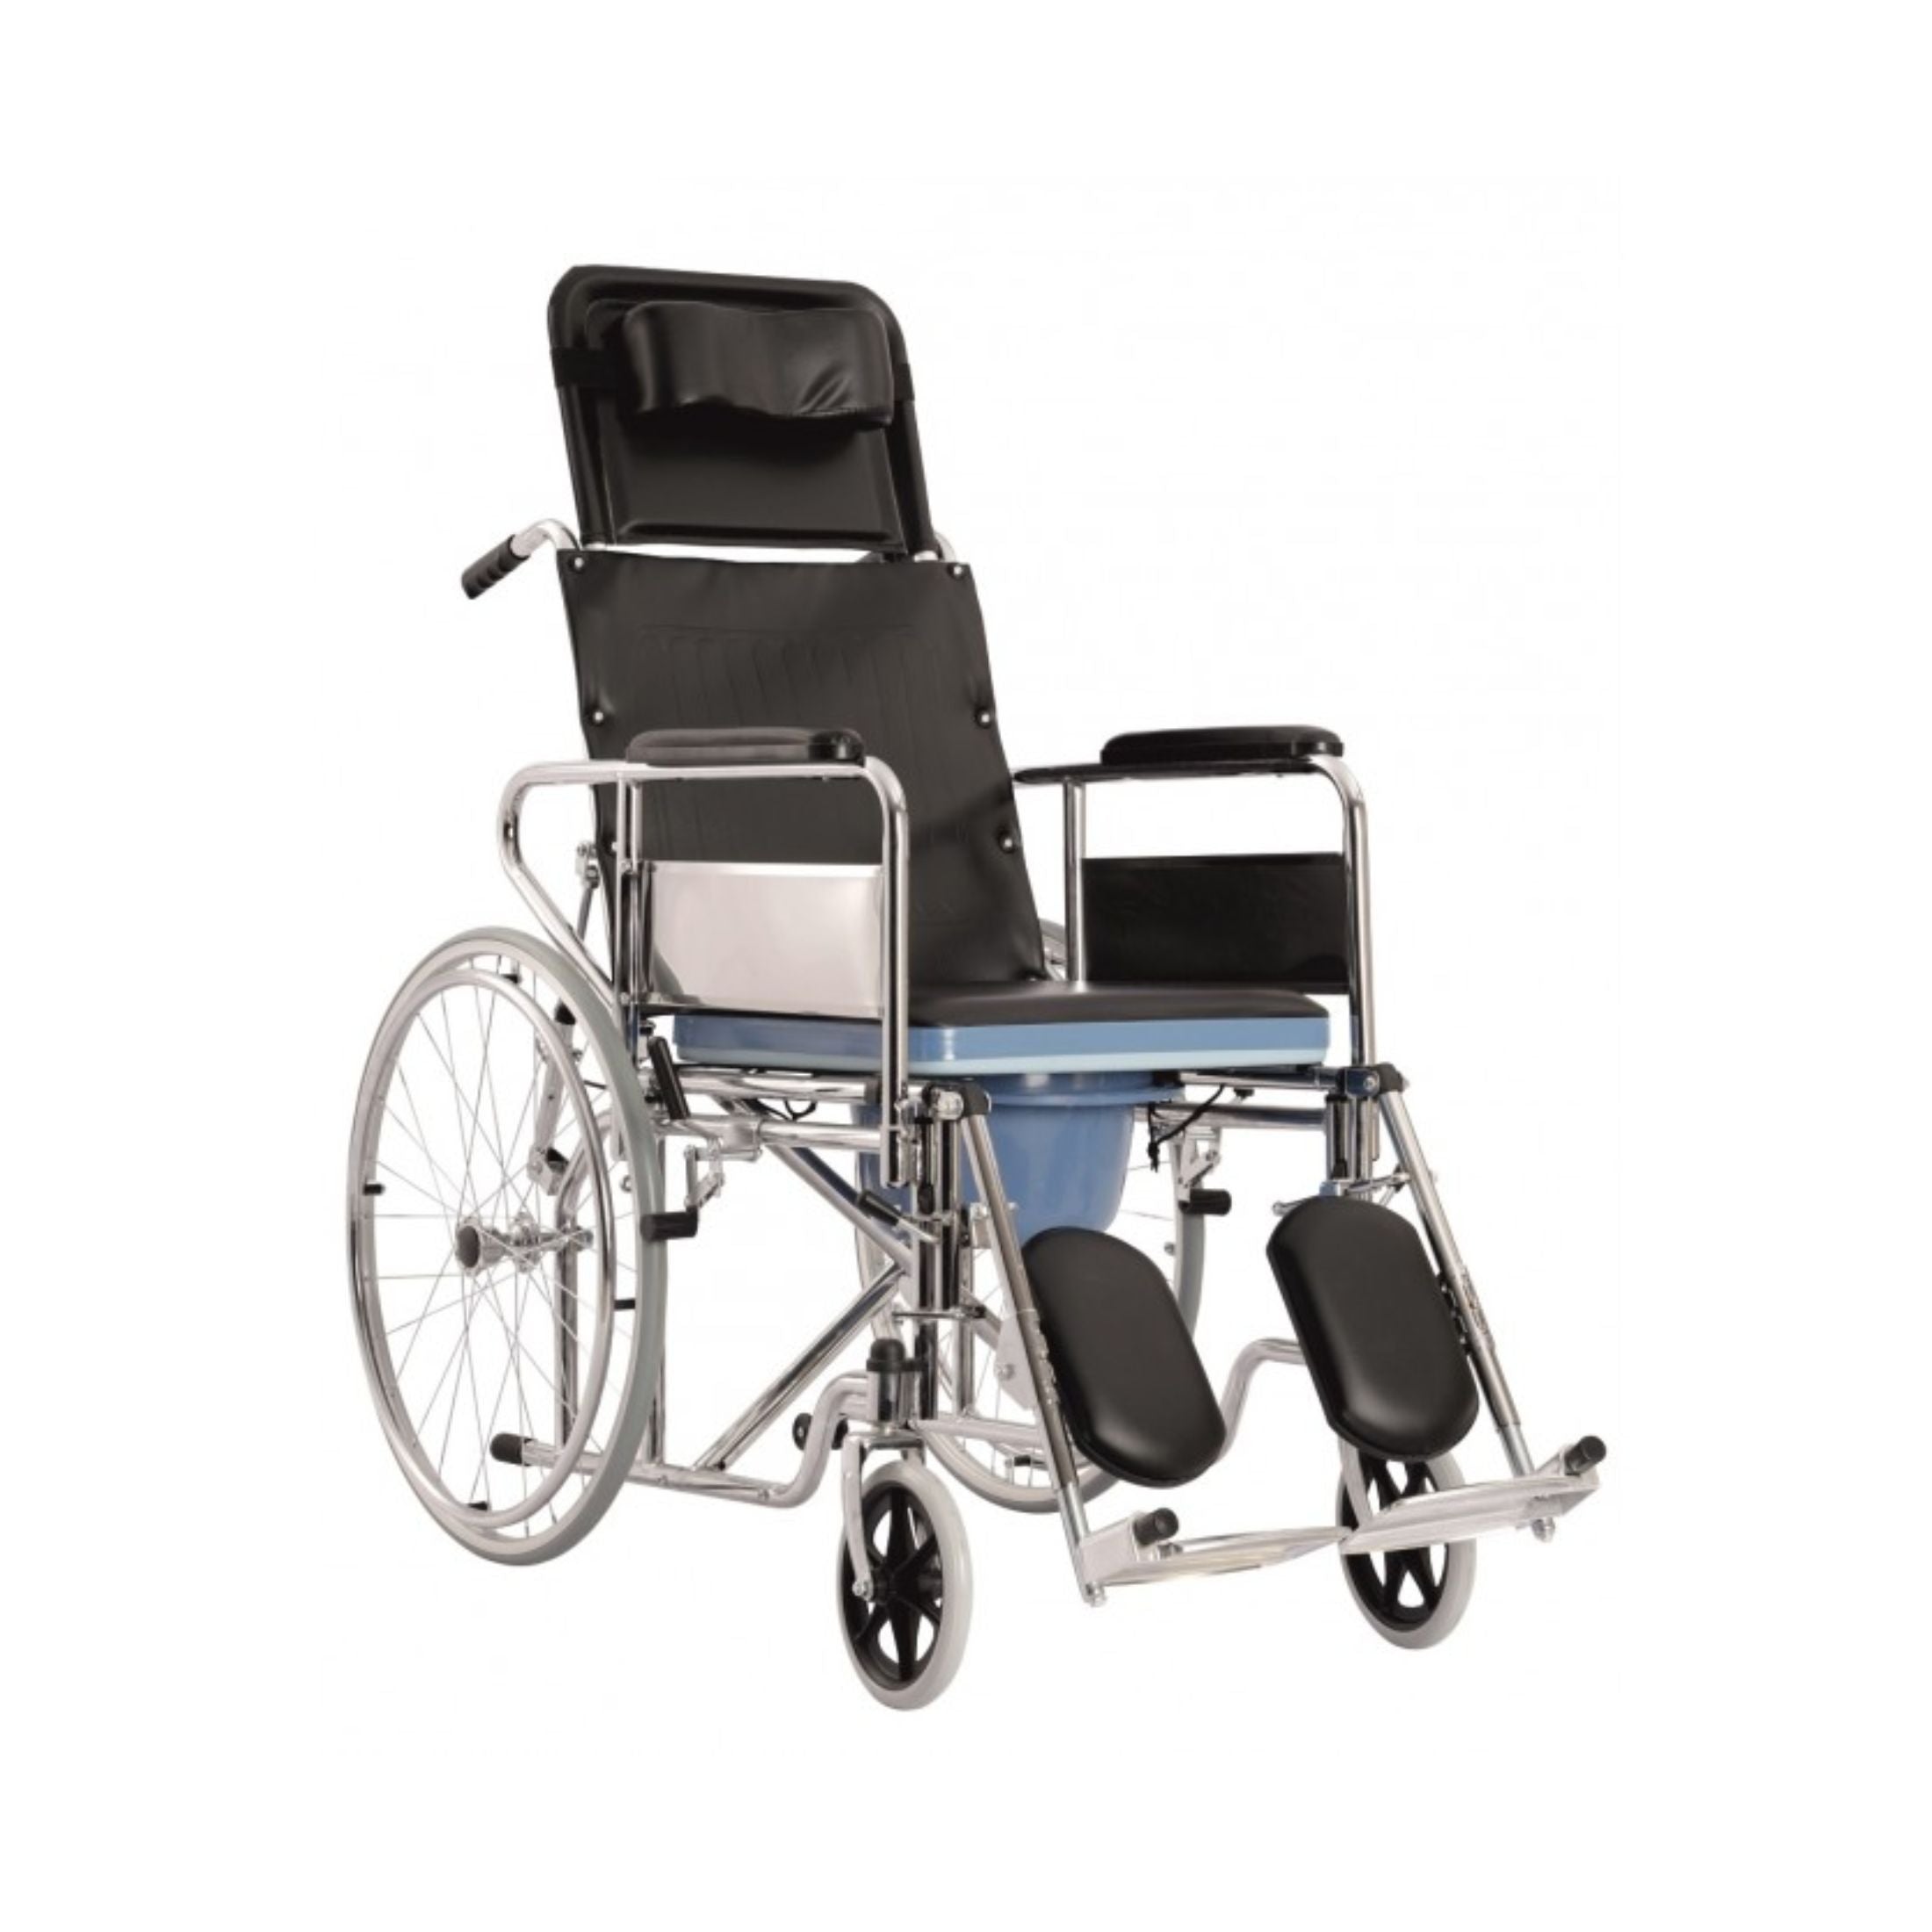 Recliner Wheelchair with Commode/Toilet Pot - Foldable Reclining Wheelchair